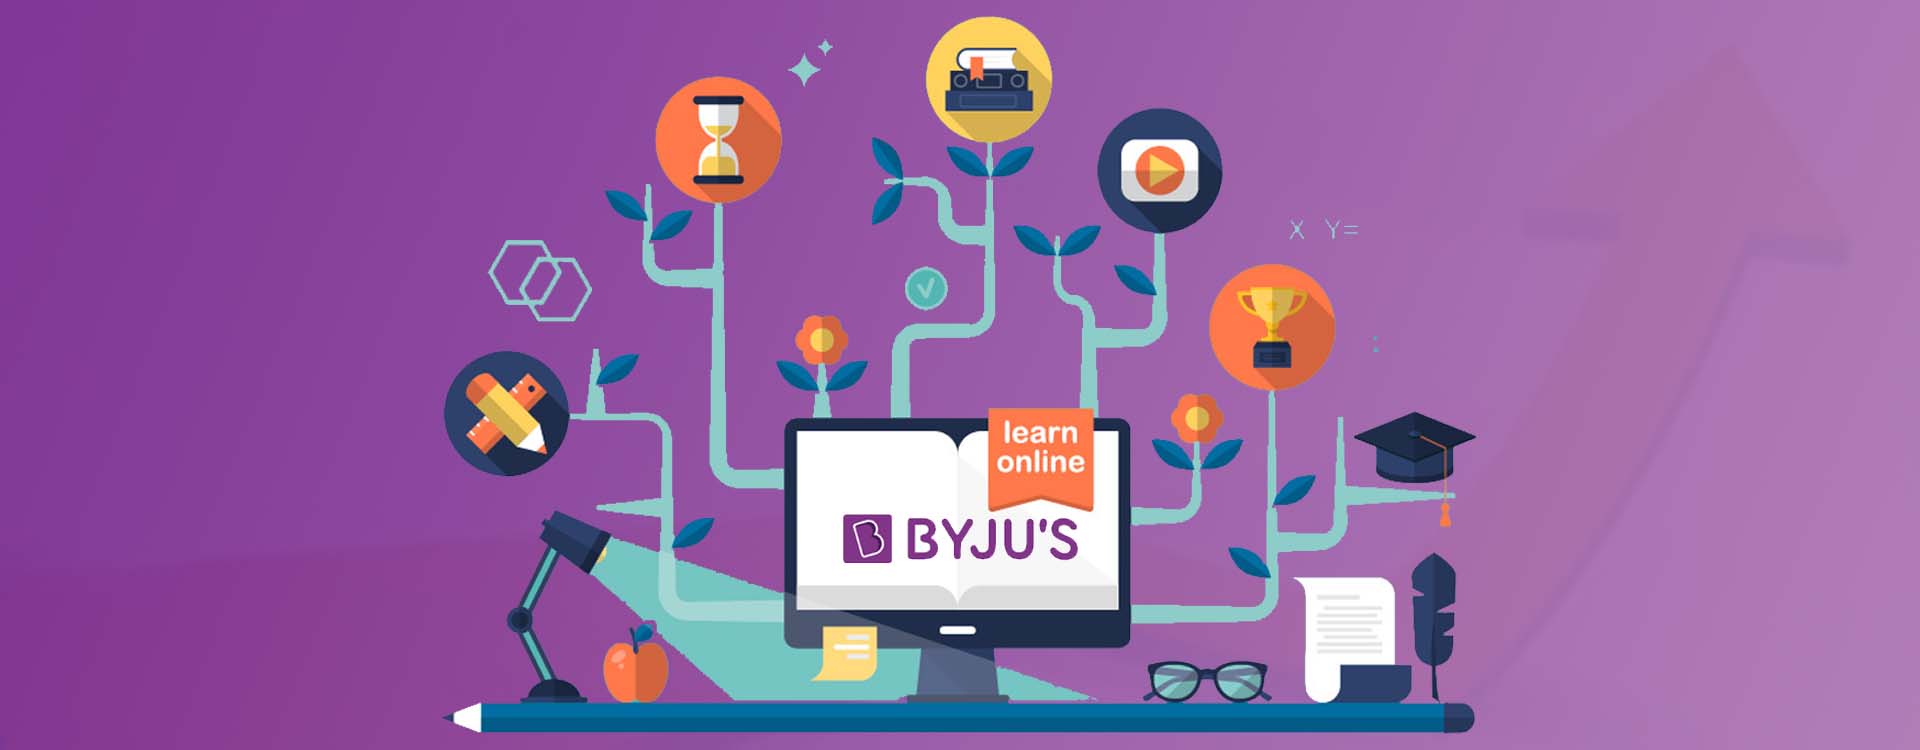 Byju Expanding Globally Through Acquisition Strategies